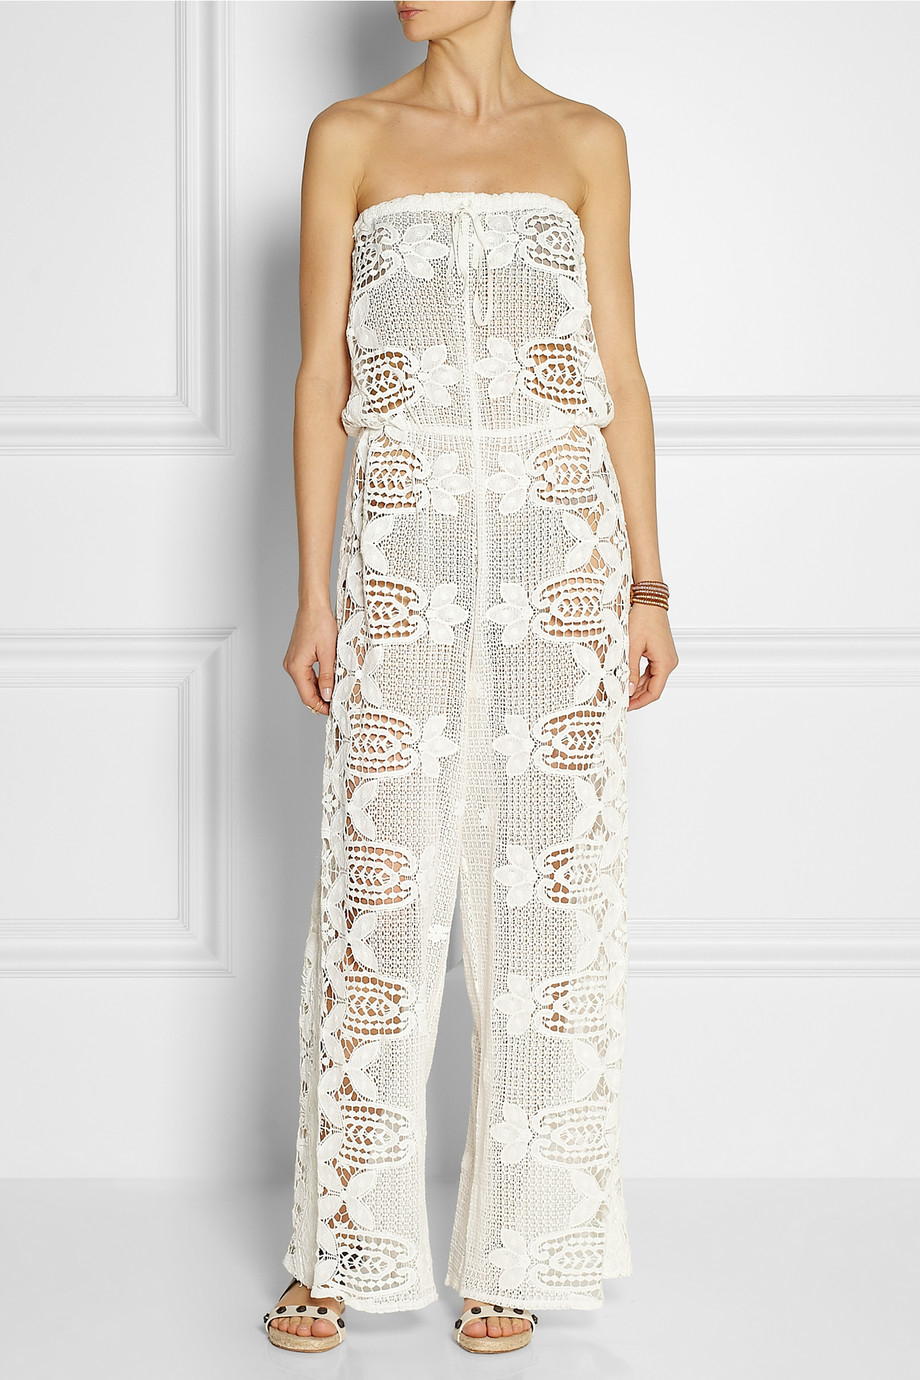 Lyst - Miguelina Piper Crocheted Cotton-Lace Jumpsuit in White